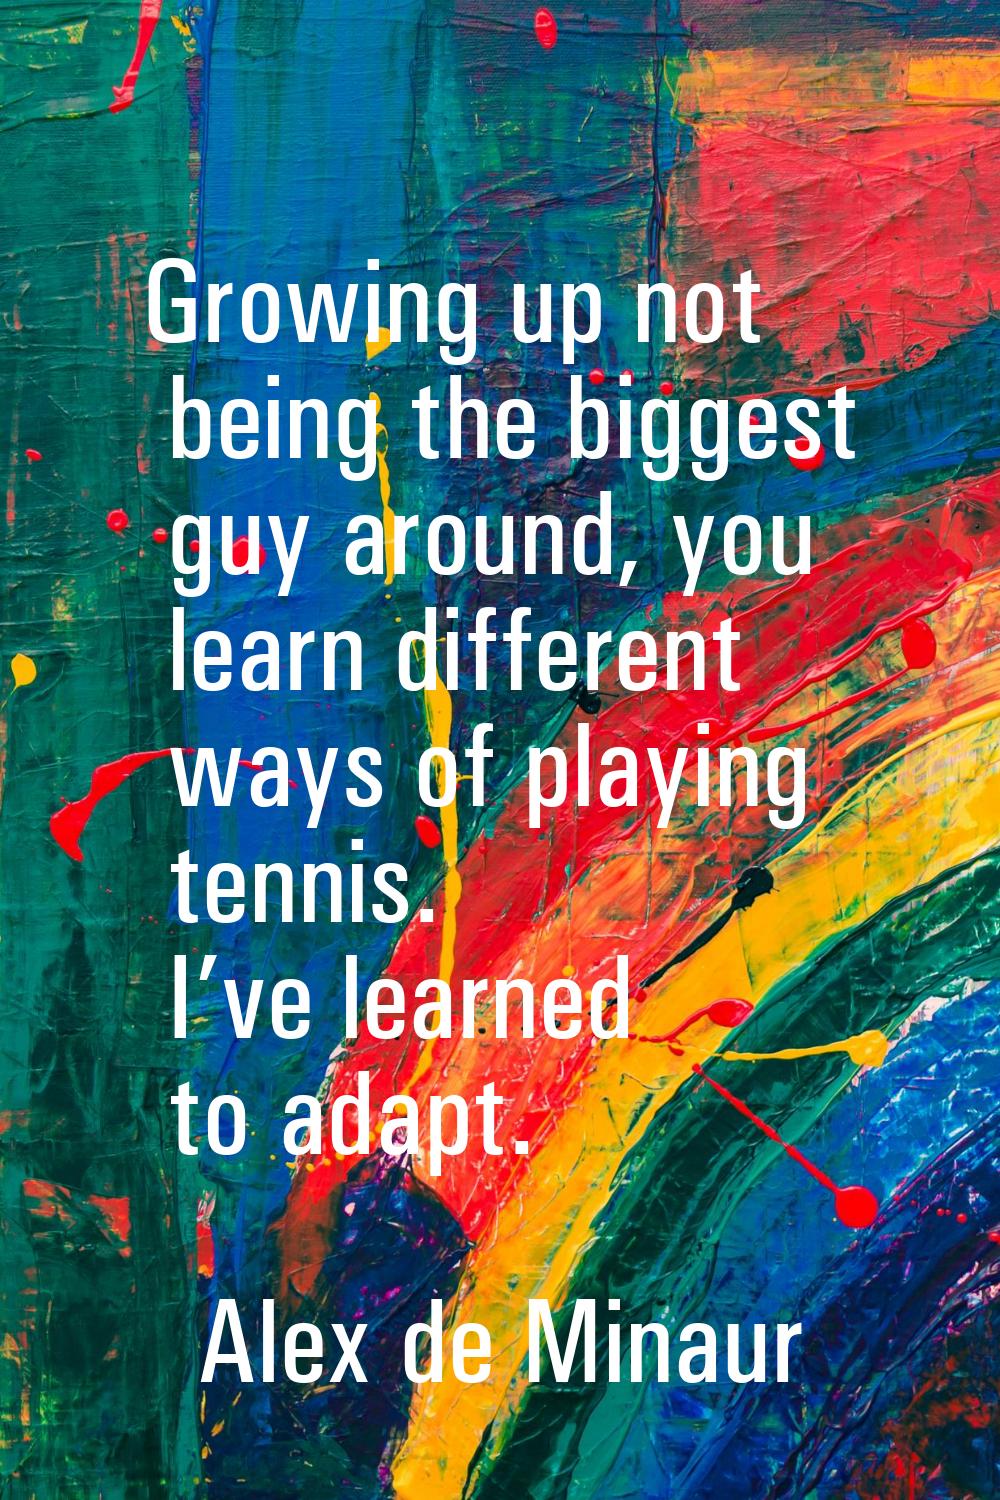 Growing up not being the biggest guy around, you learn different ways of playing tennis. I’ve learn